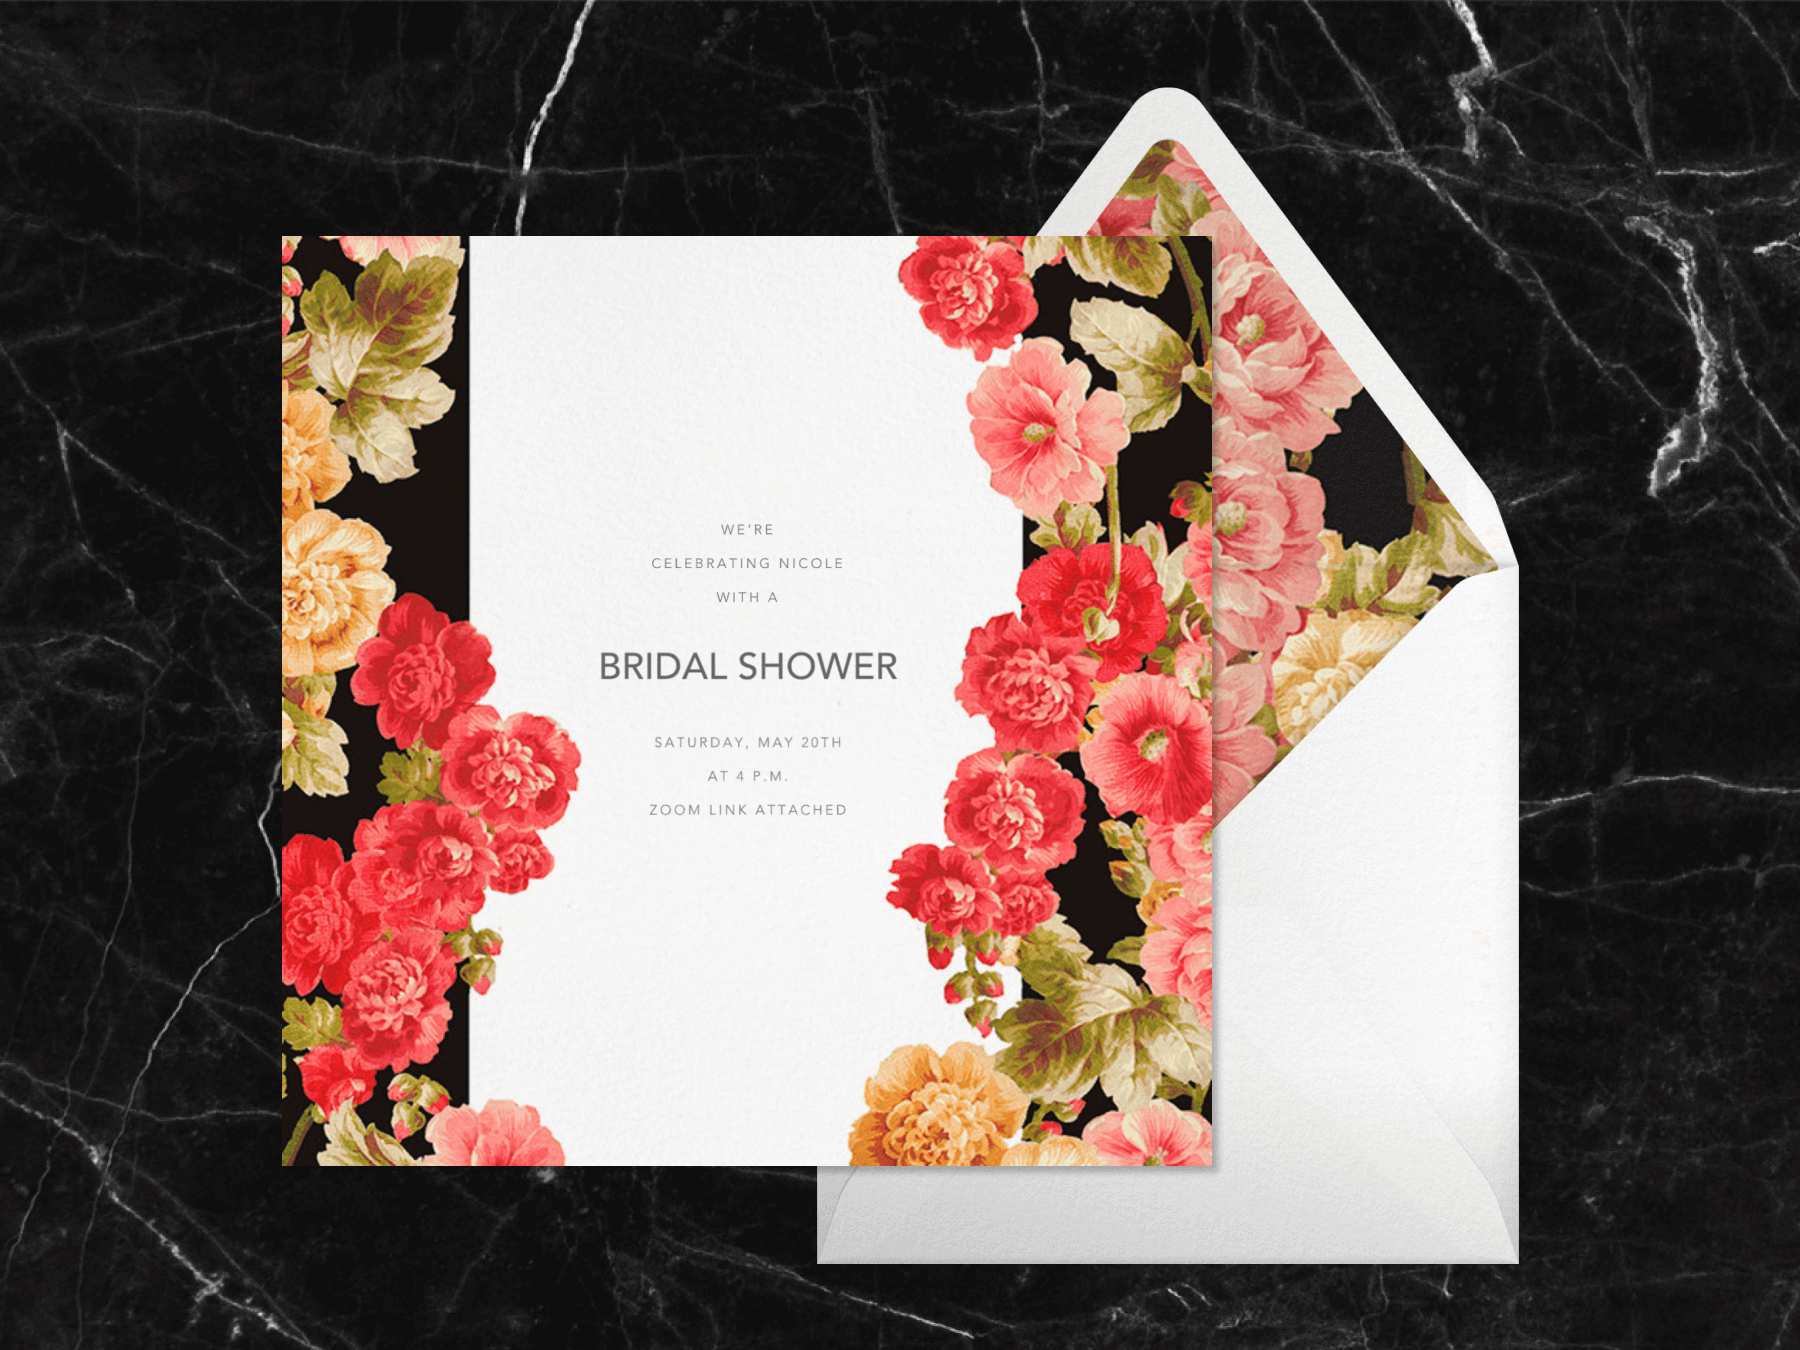 A virtual bridal shower invitation with big graphic garden floral prints on both sides of the text space, paired with a white envelope and matching liner.